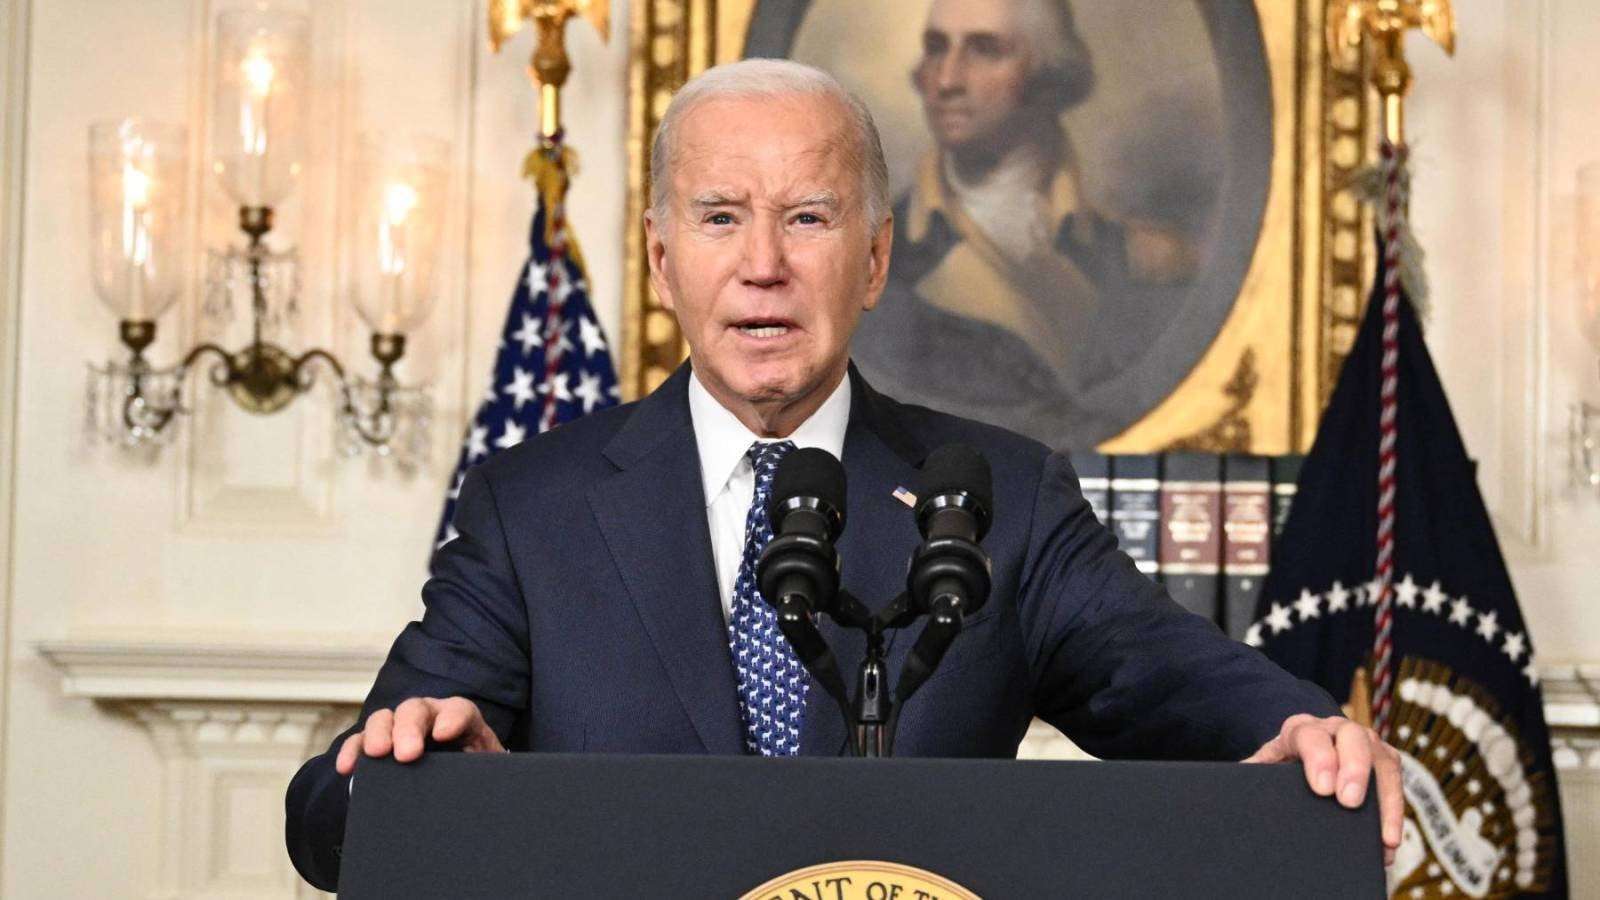 image for Biden Blasts Special Counsel Suggesting He Forgot Son’s Death: ‘How in the Hell Dare He’